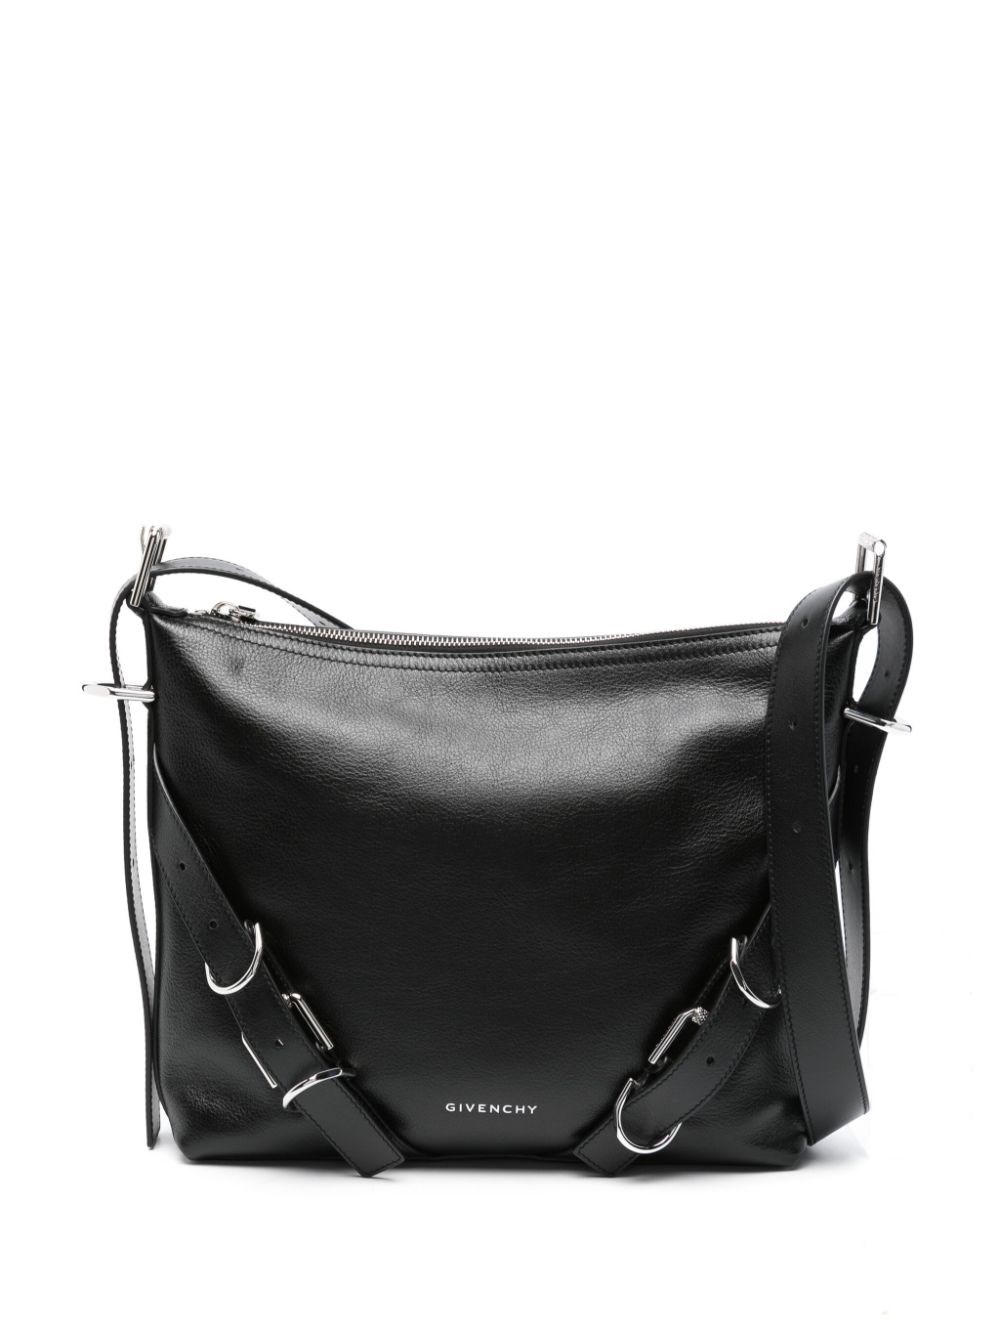 Givenchy Men's Voyou Crossbody Bag In Grained Leather In Black